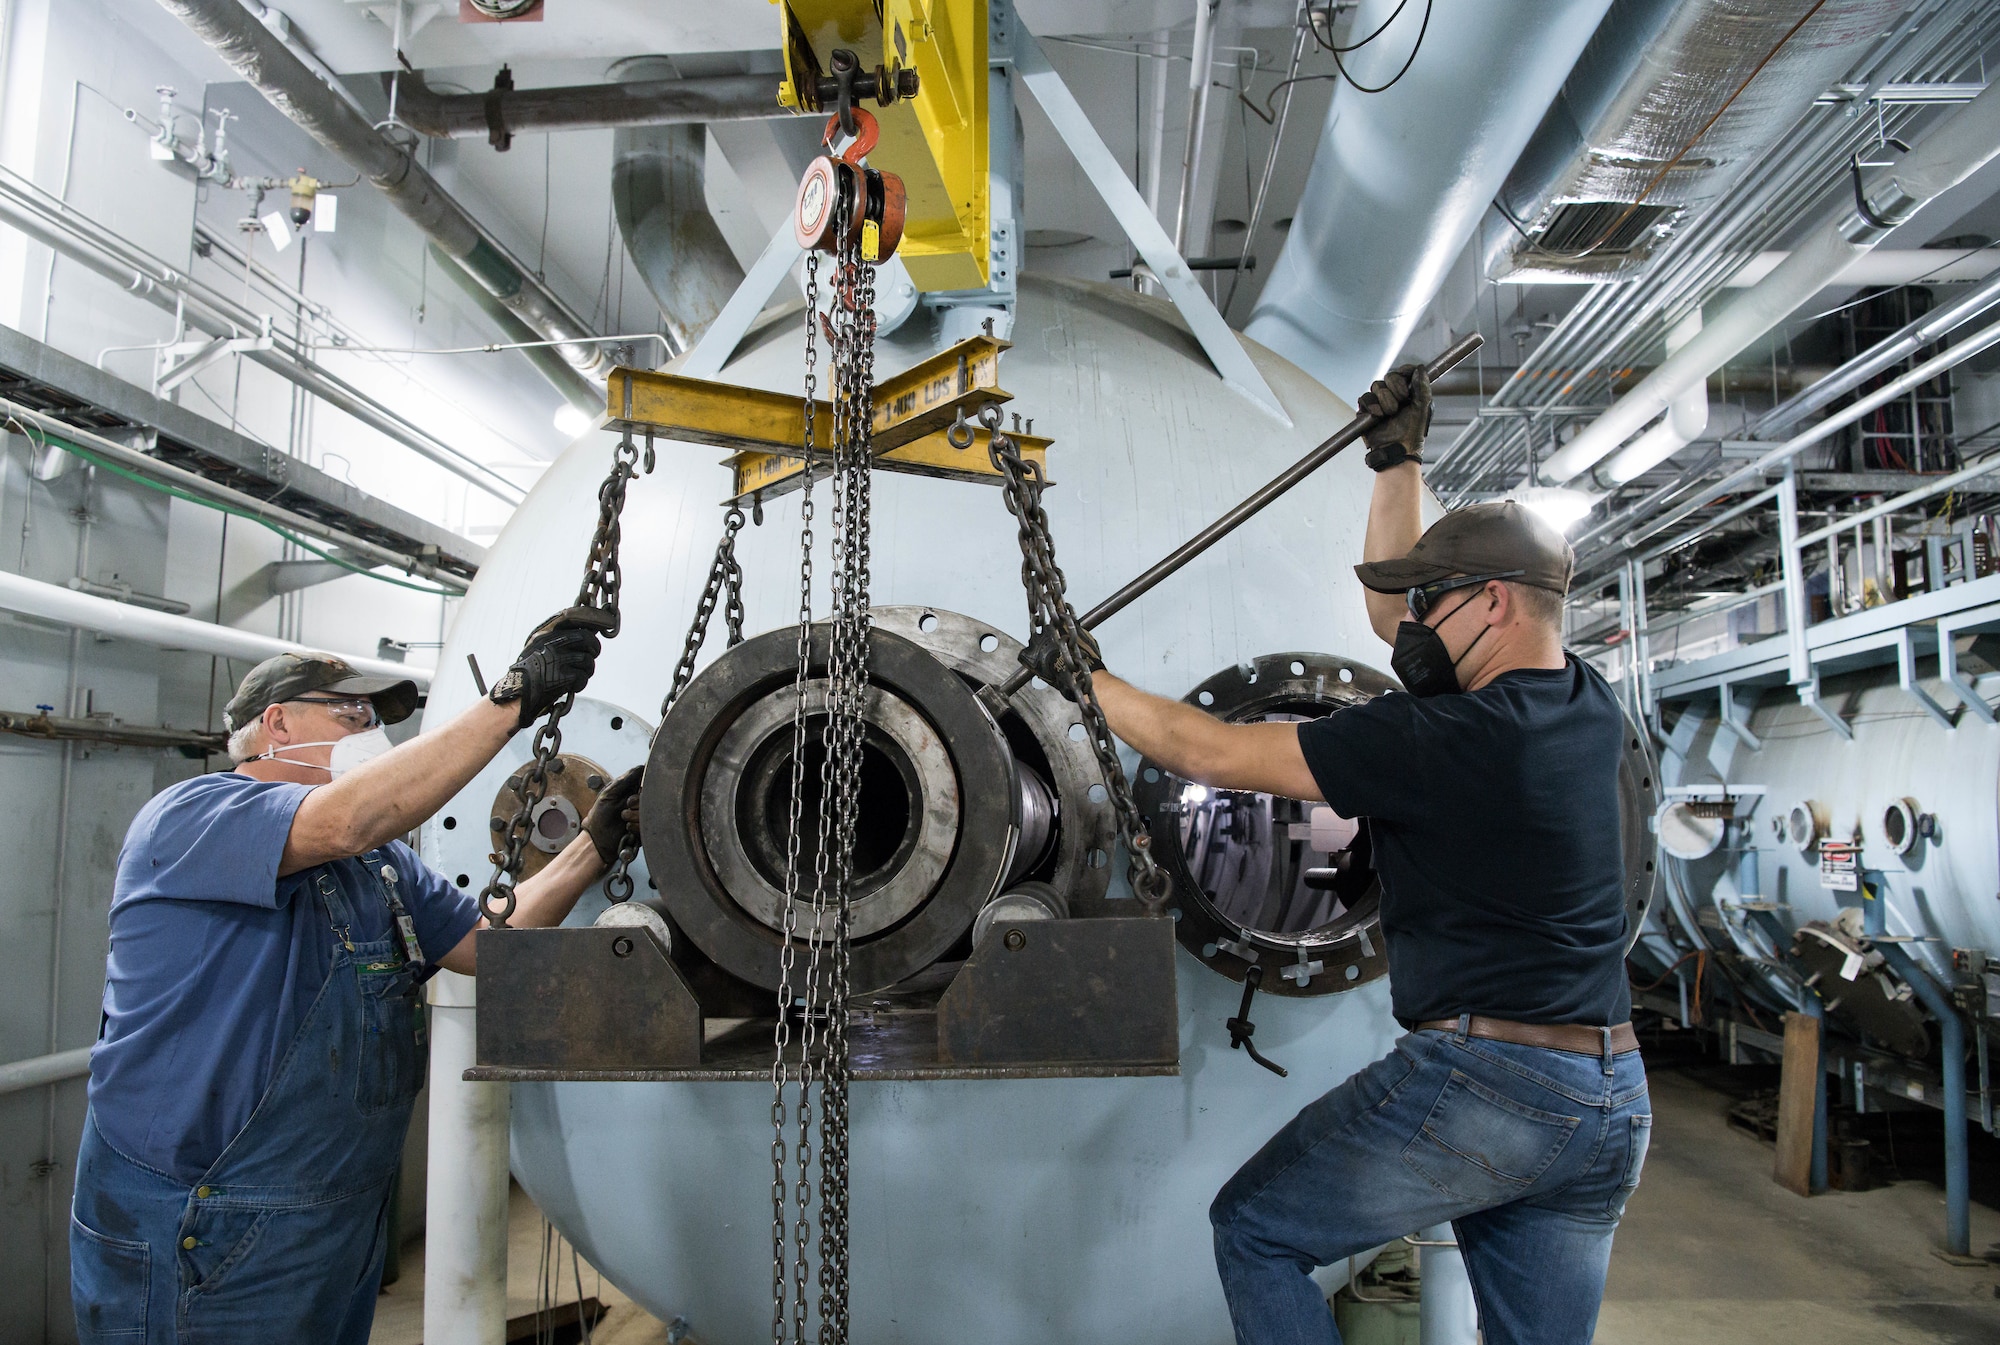 Greg Smartt, left, and Tim Mullins, Arnold Engineering Development Complex machinists, rotate a connection assembly into place on the end of the 8-inch barrel for the Hyper-ballistic Range G gun at Arnold Air Force Base, Tenn., March 19, 2021. The barrel consists of several sections that have to be connected and perfectly aligned. (U.S. Air Force photo by Jill Pickett)